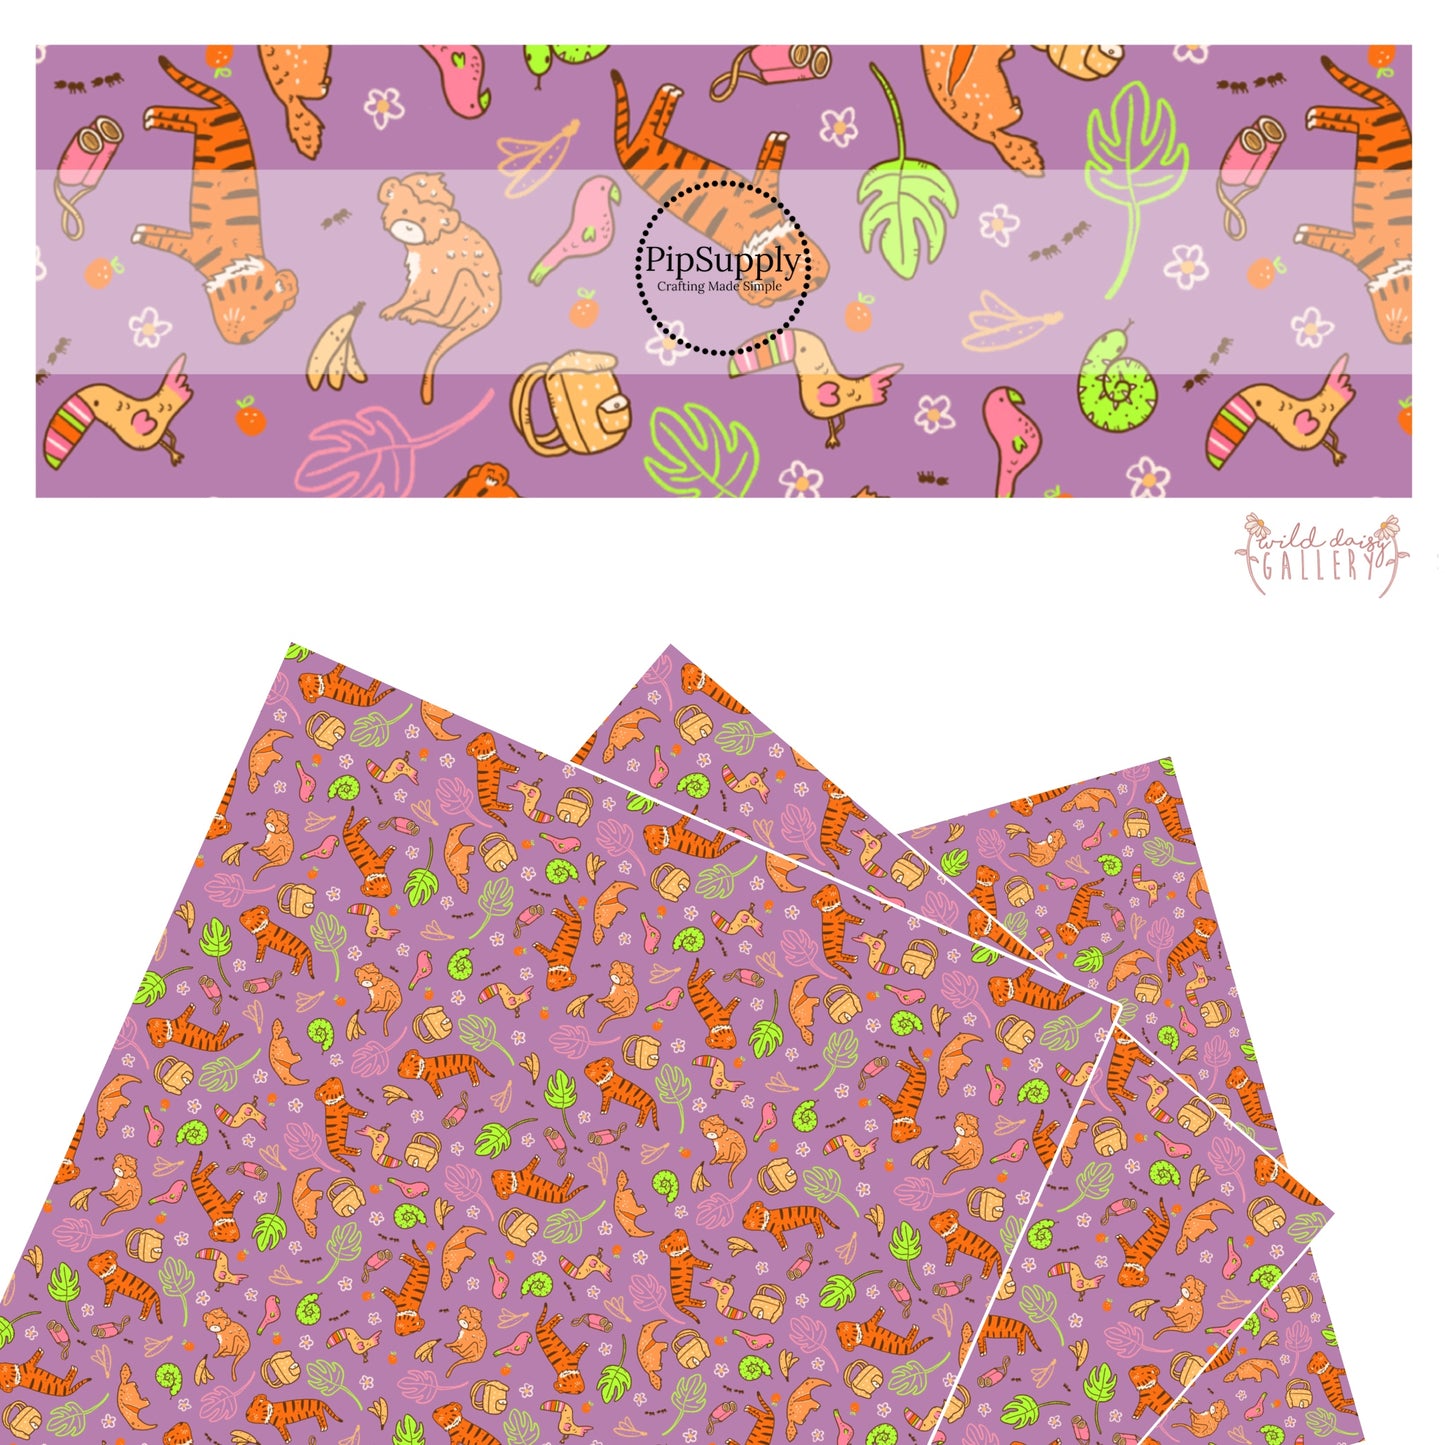 These jungle animal themed purple faux leather sheets contain the following design elements: lions, birds, snakes, monkeys, toucans, bananas, leaves and flowers. 